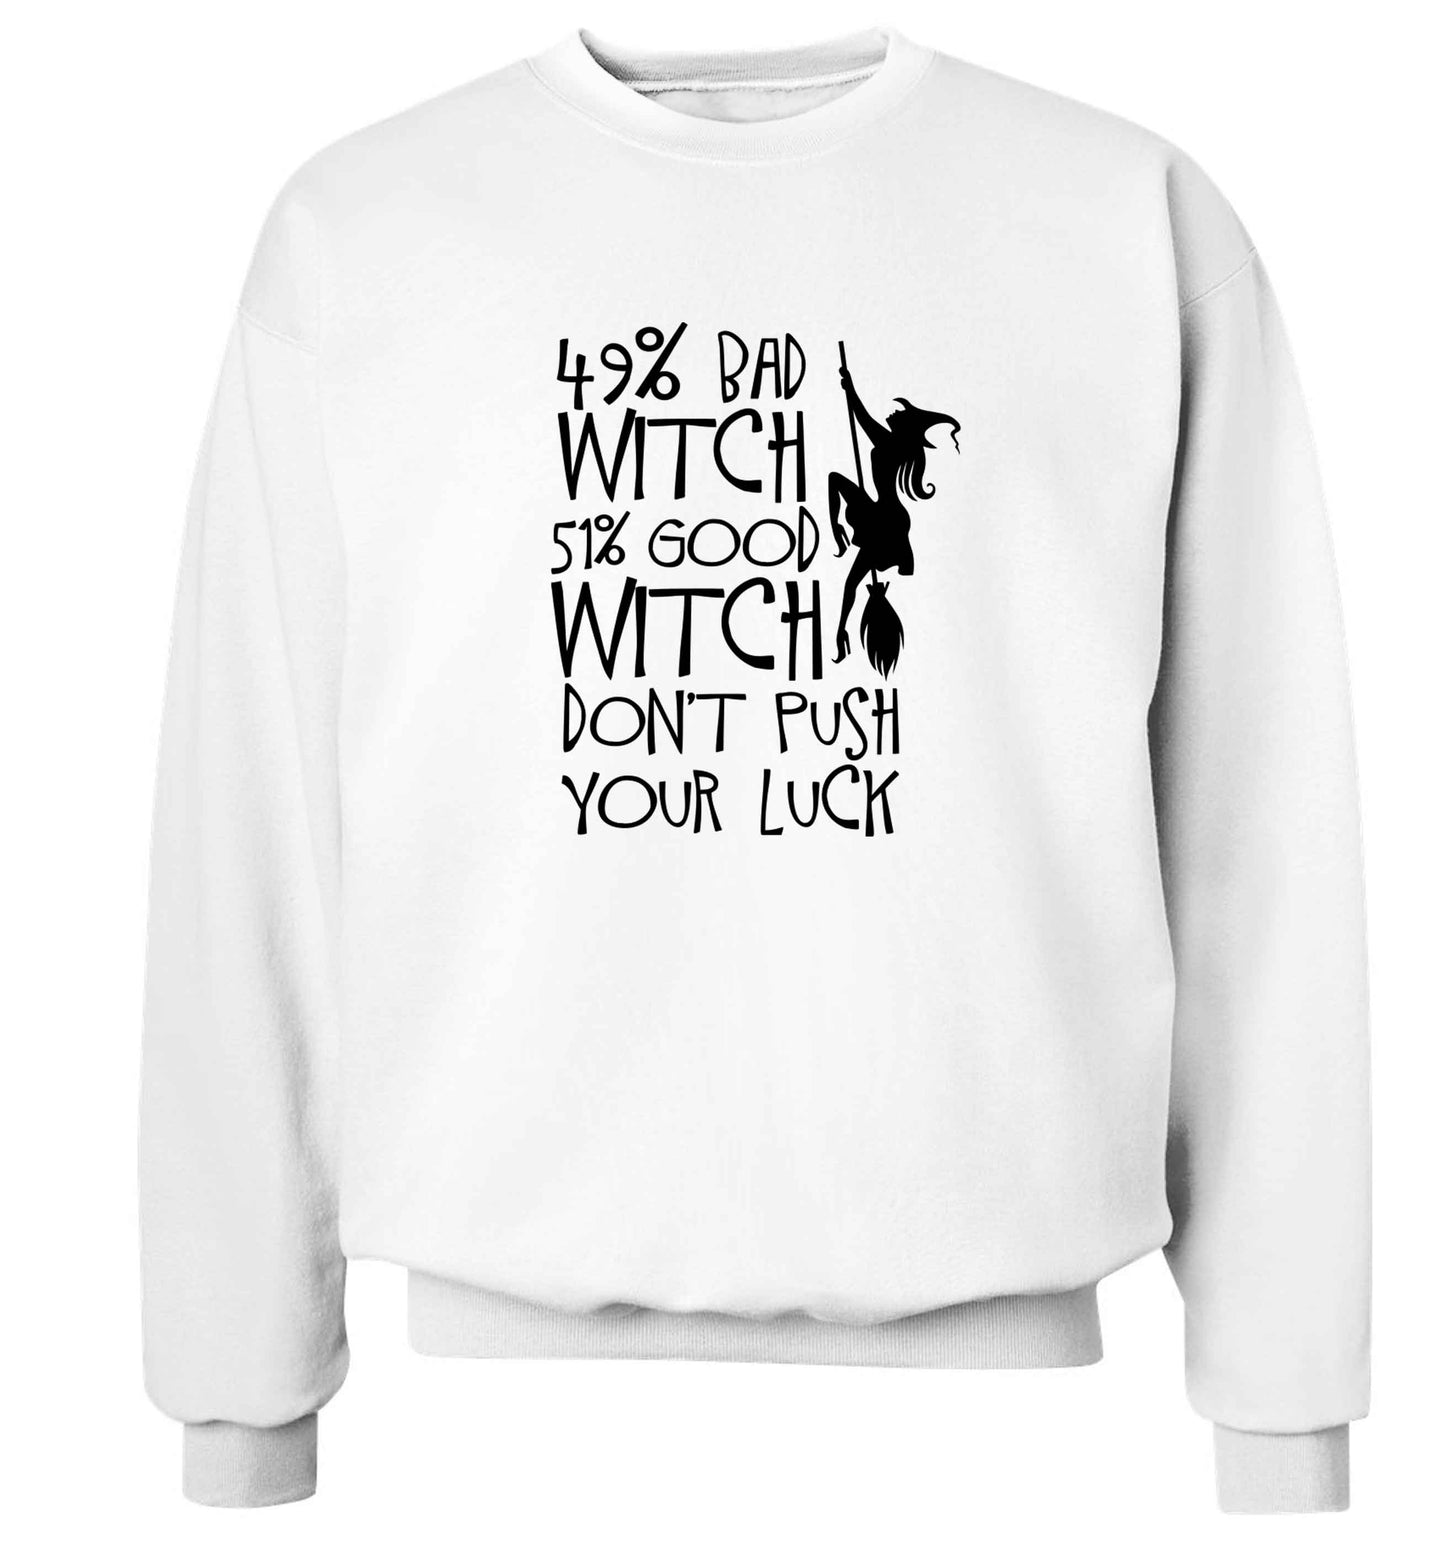 49% bad witch 51% good witch don't push your luck adult's unisex white sweater 2XL